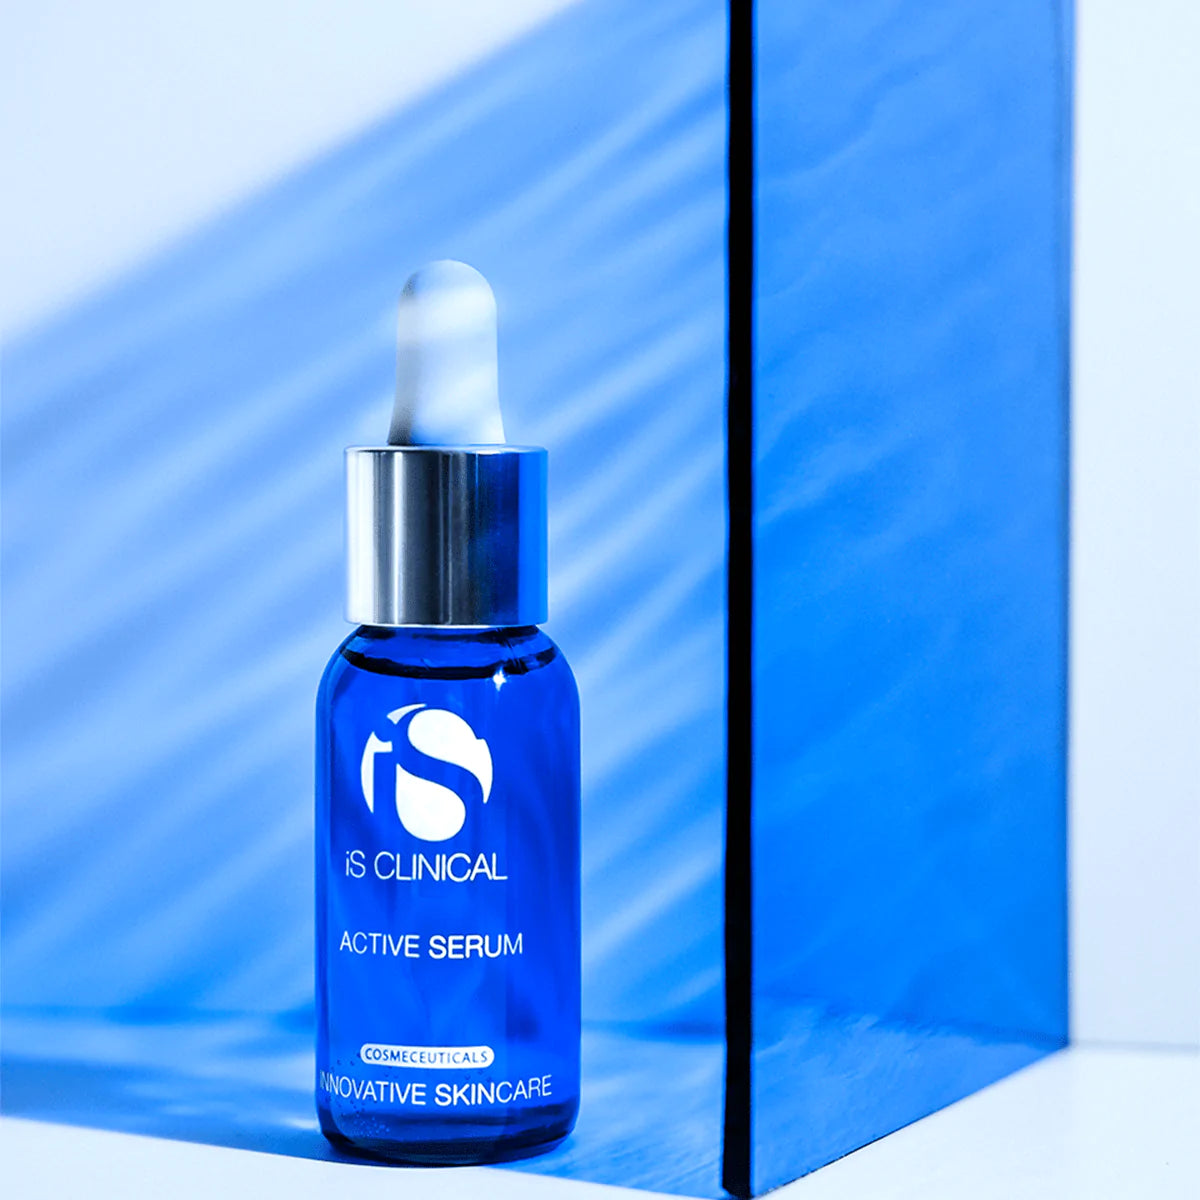 iS CLINICAL - Active serum